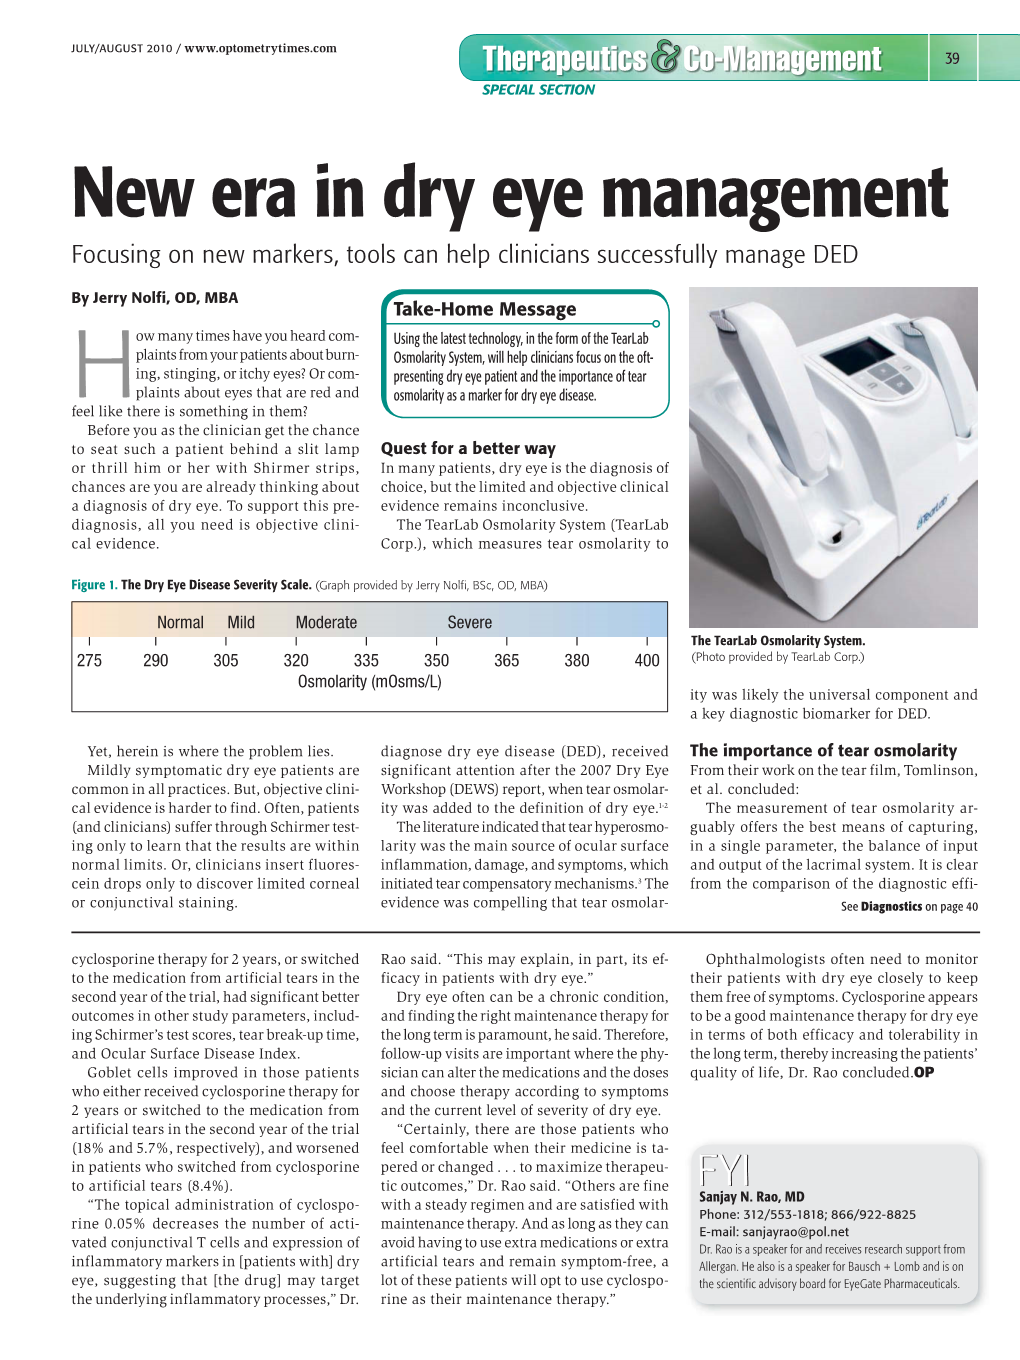 New Era in Dry Eye Management Focusing on New Markers, Tools Can Help Clinicians Successfully Manage DED